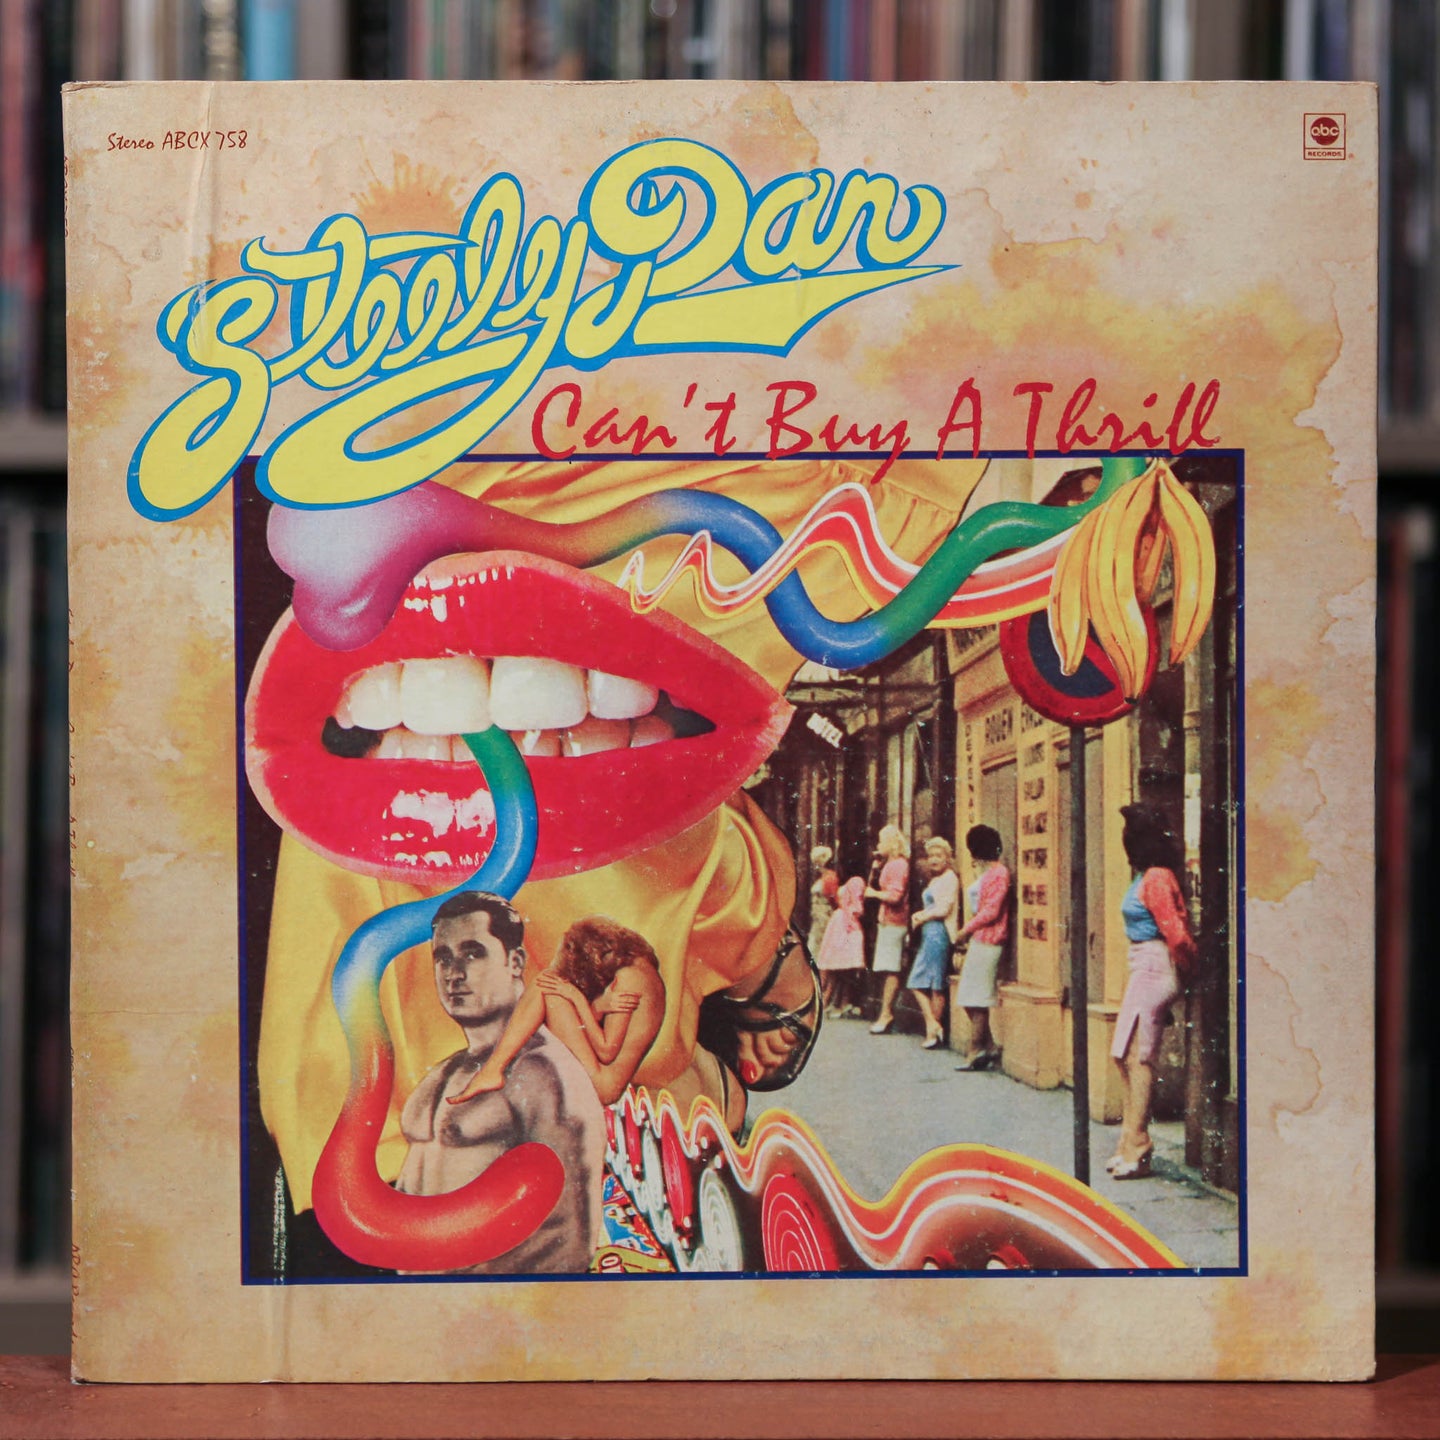 Steely Dan - Can't Buy A Thrill - 1972 ABC, VG+/VG